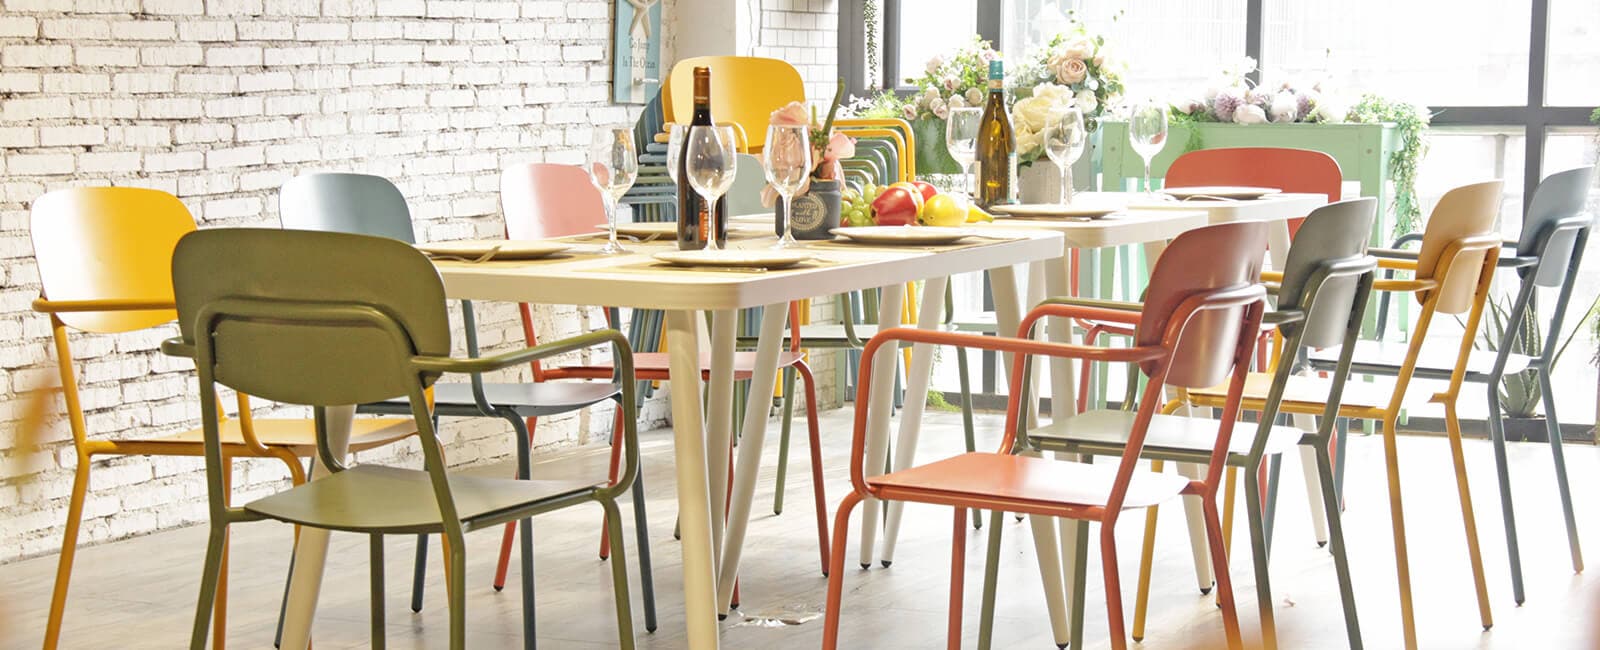 CDG Furniture Is A One-Stop Supplier For Restaurant, Cafe, Garden Furniture